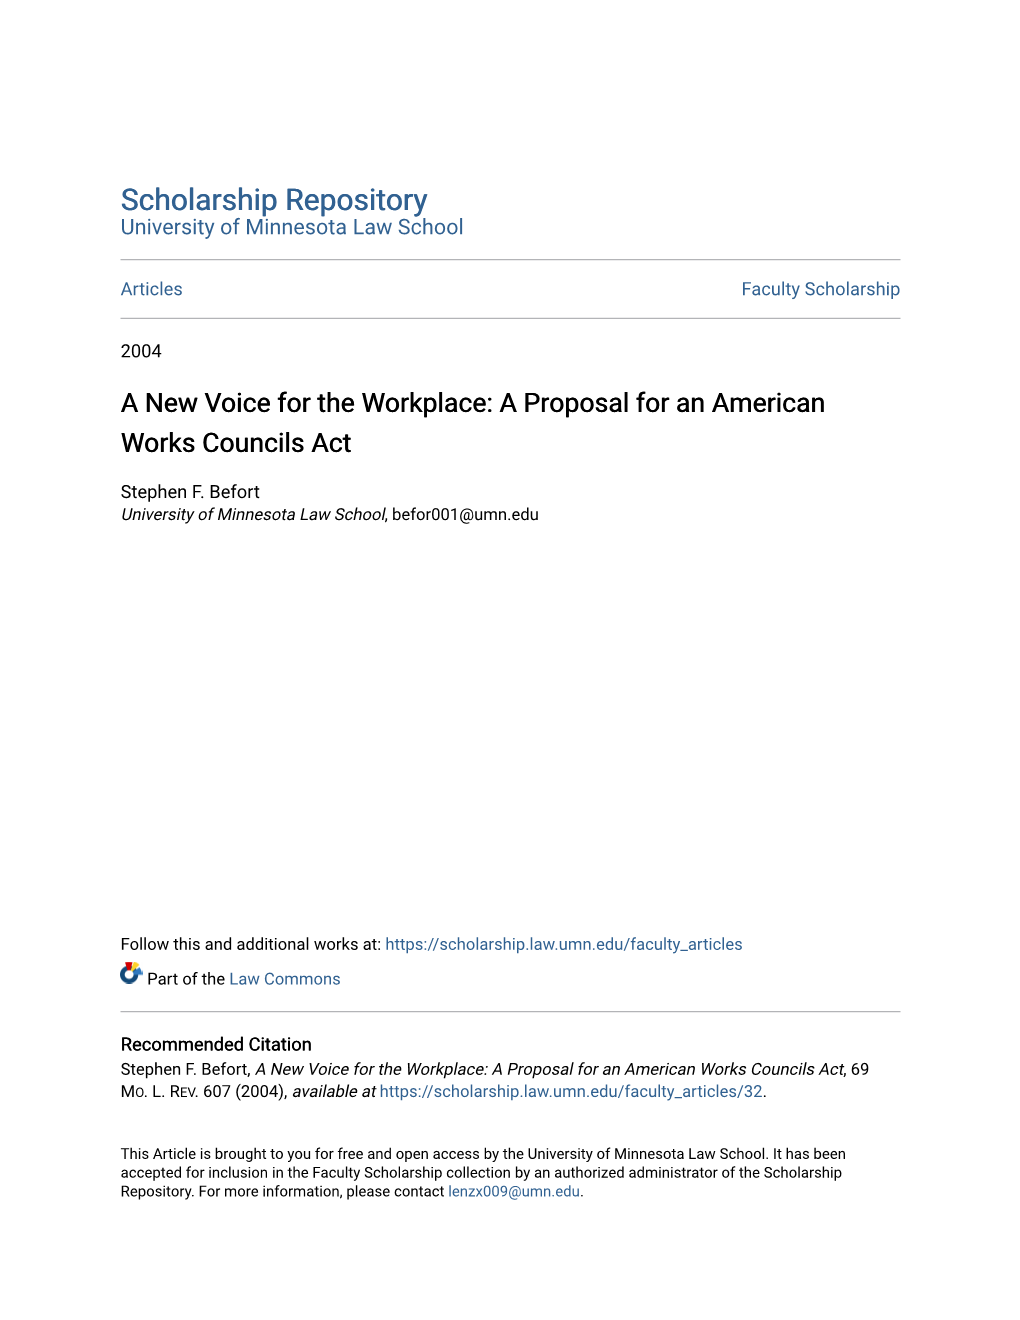 A New Voice for the Workplace: a Proposal for an American Works Councils Act